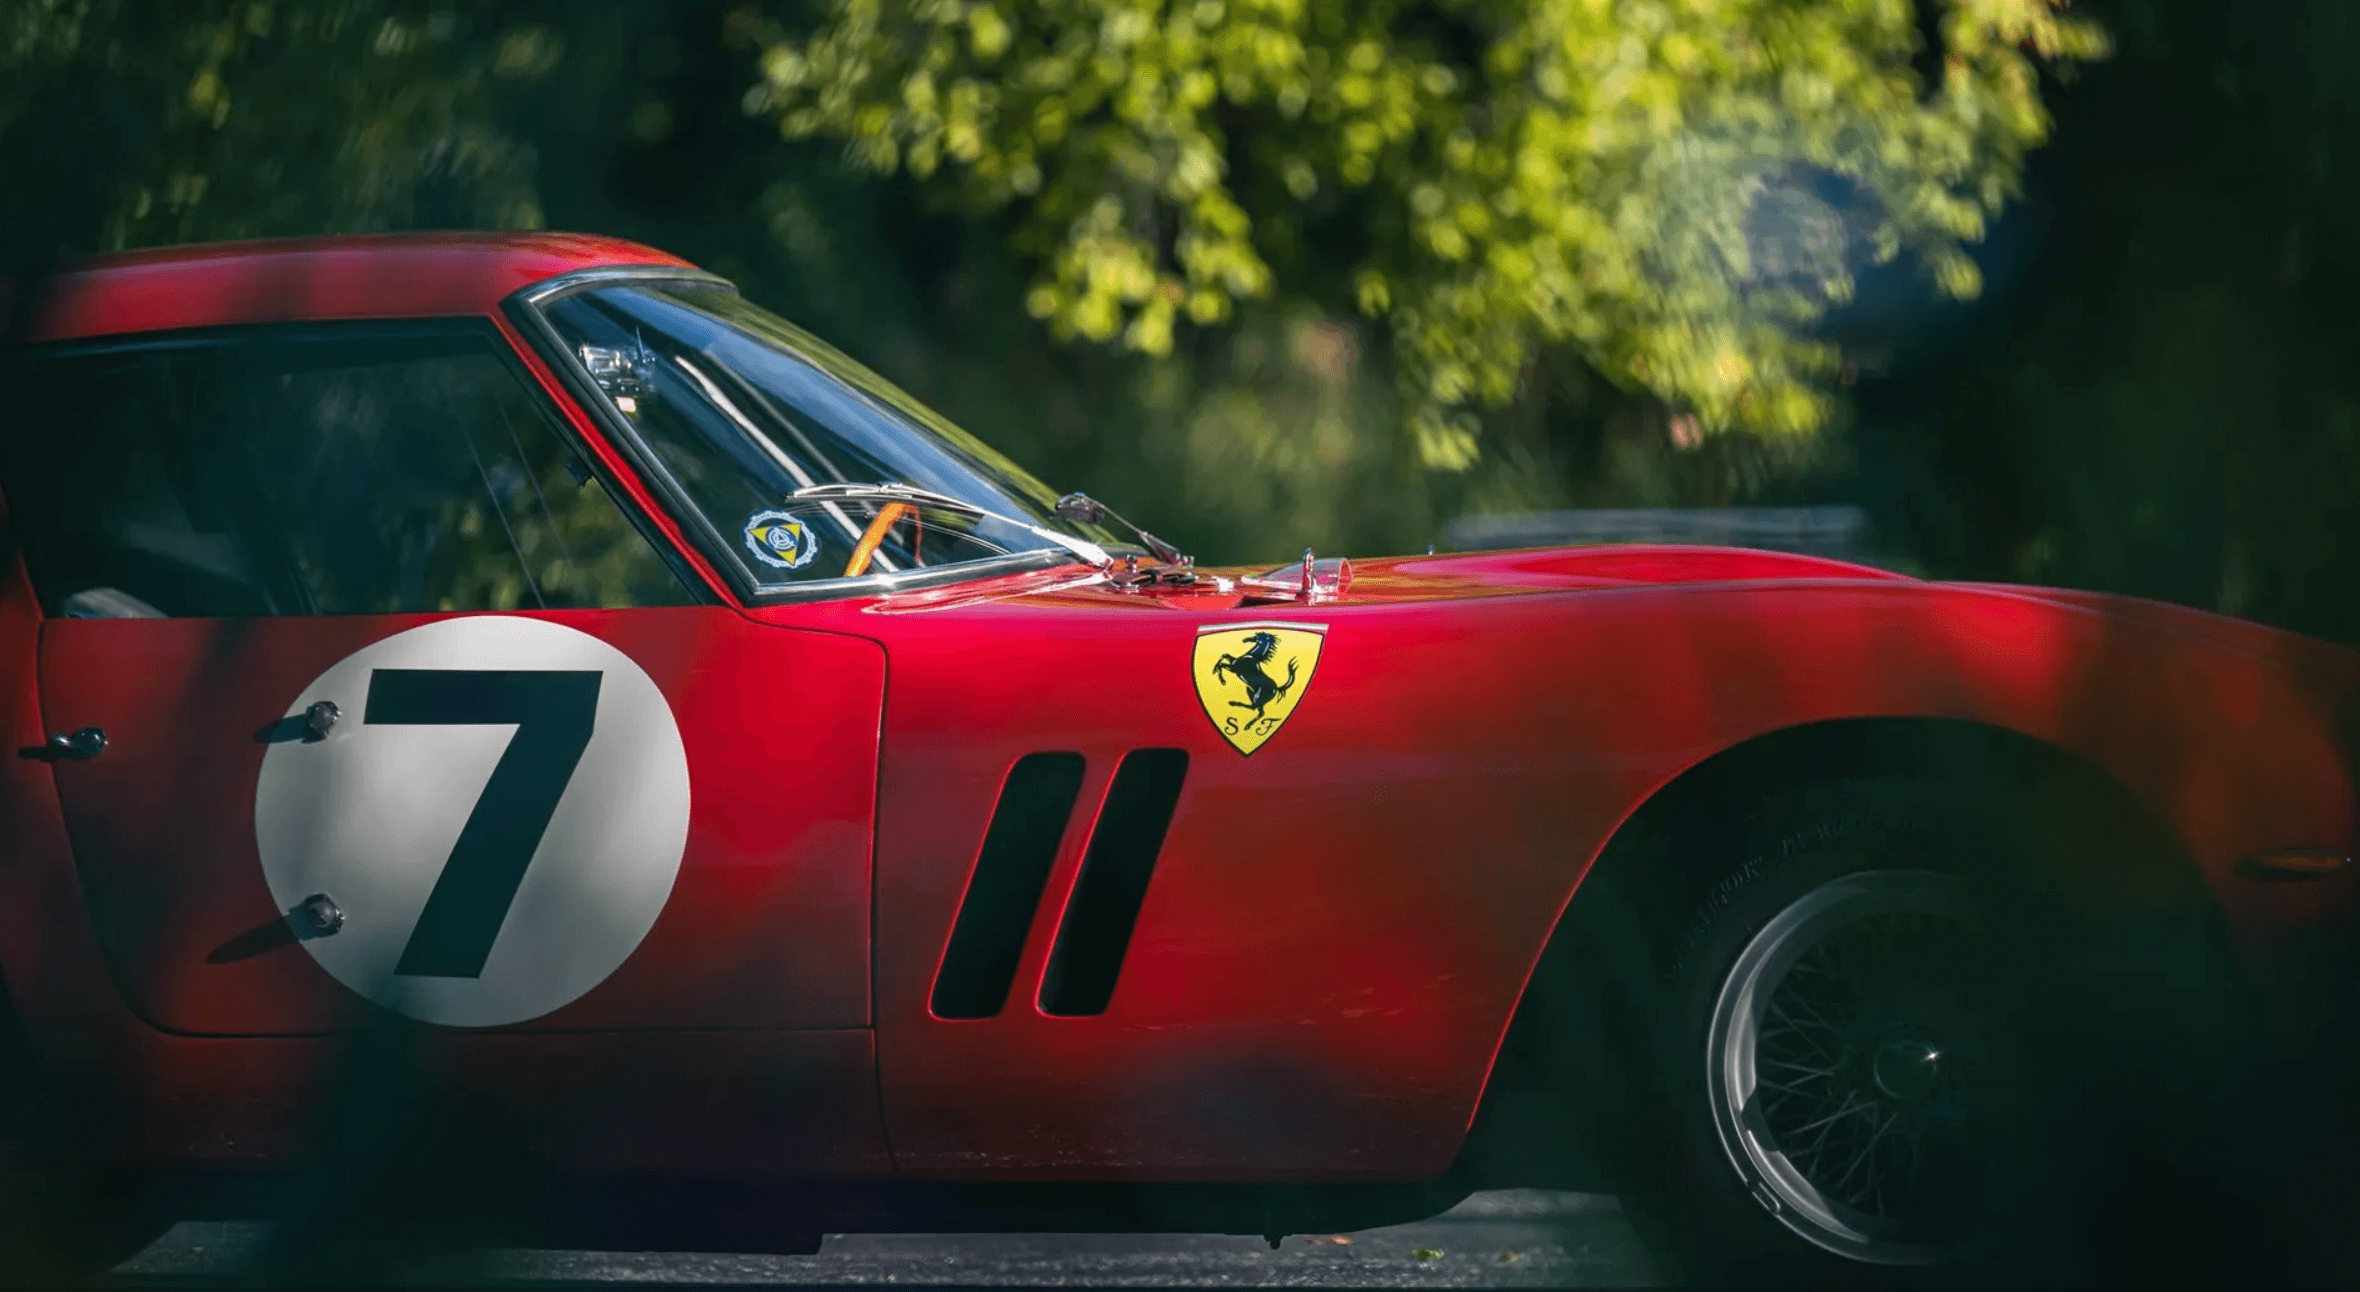 The 1962 Ferrari 330 LM/250 GTO and its design on the side